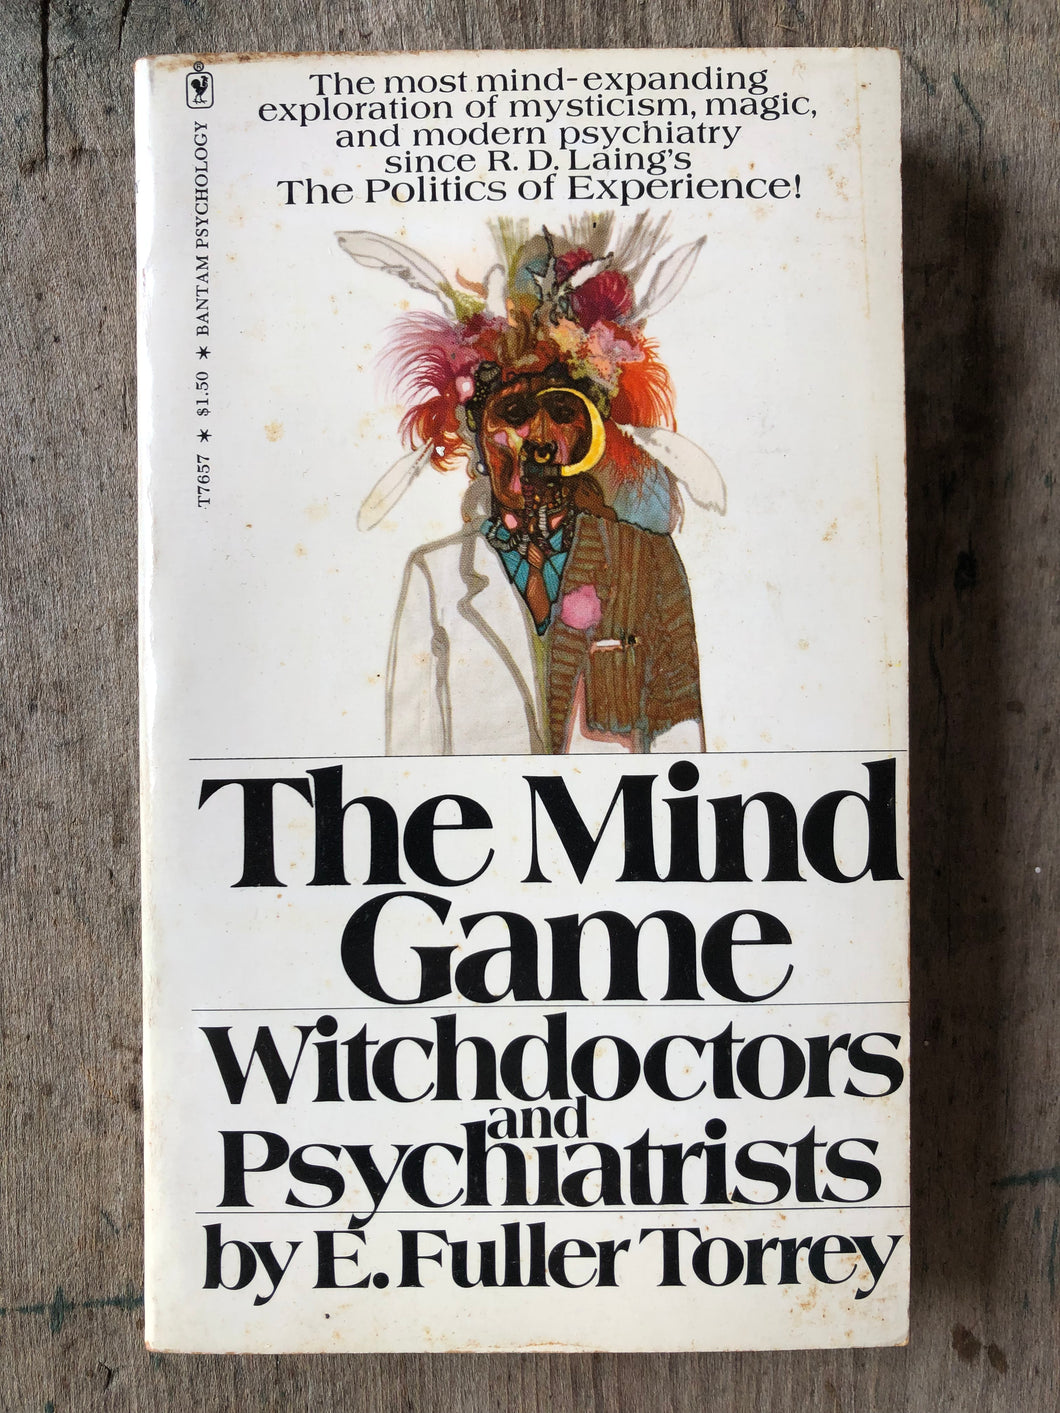 The Mind Game: Witchdoctors and Psychiatrists. by E. Fuller Torrey, M.D.